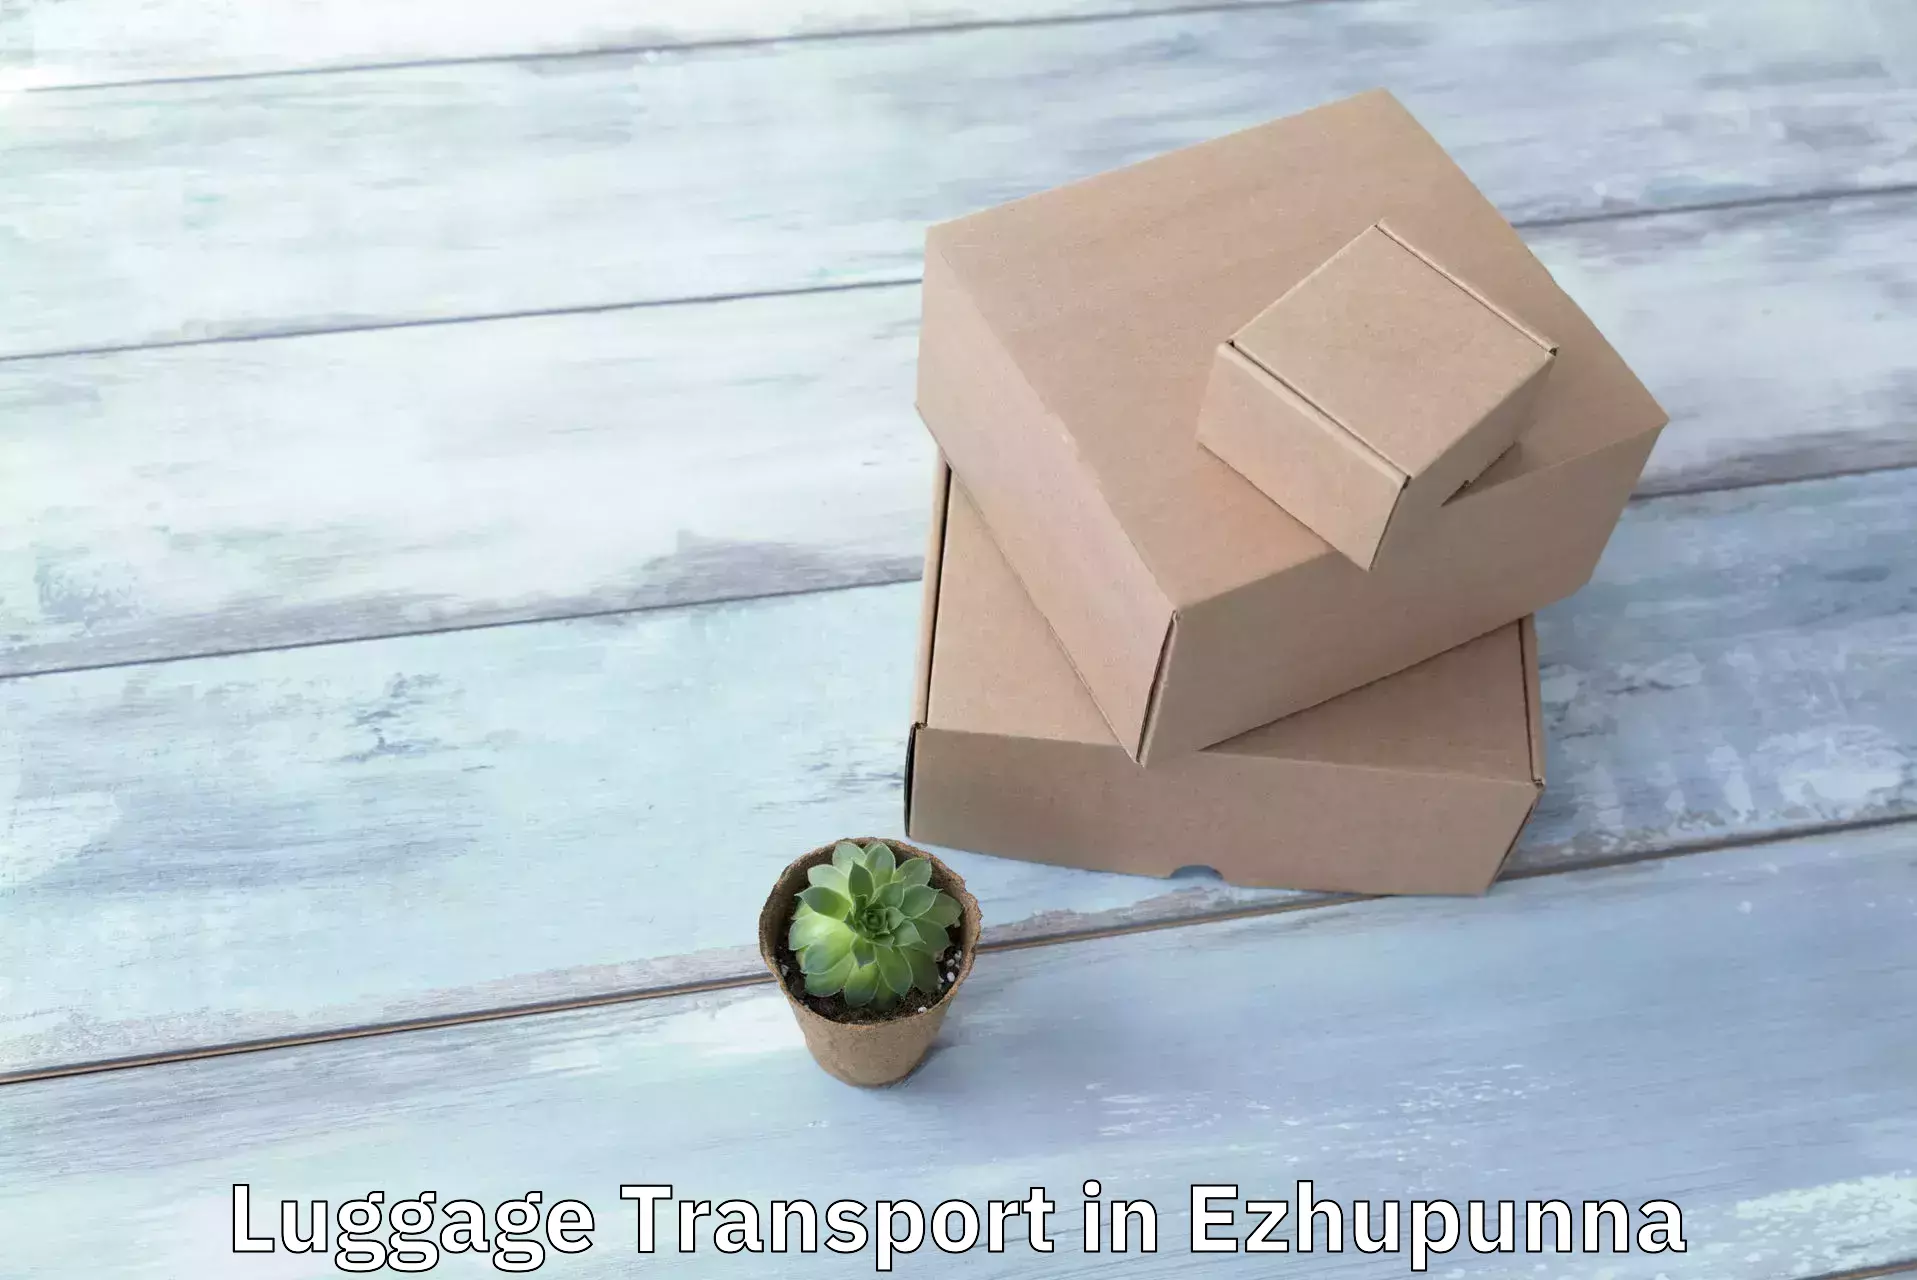 Simplified luggage transport in Ezhupunna